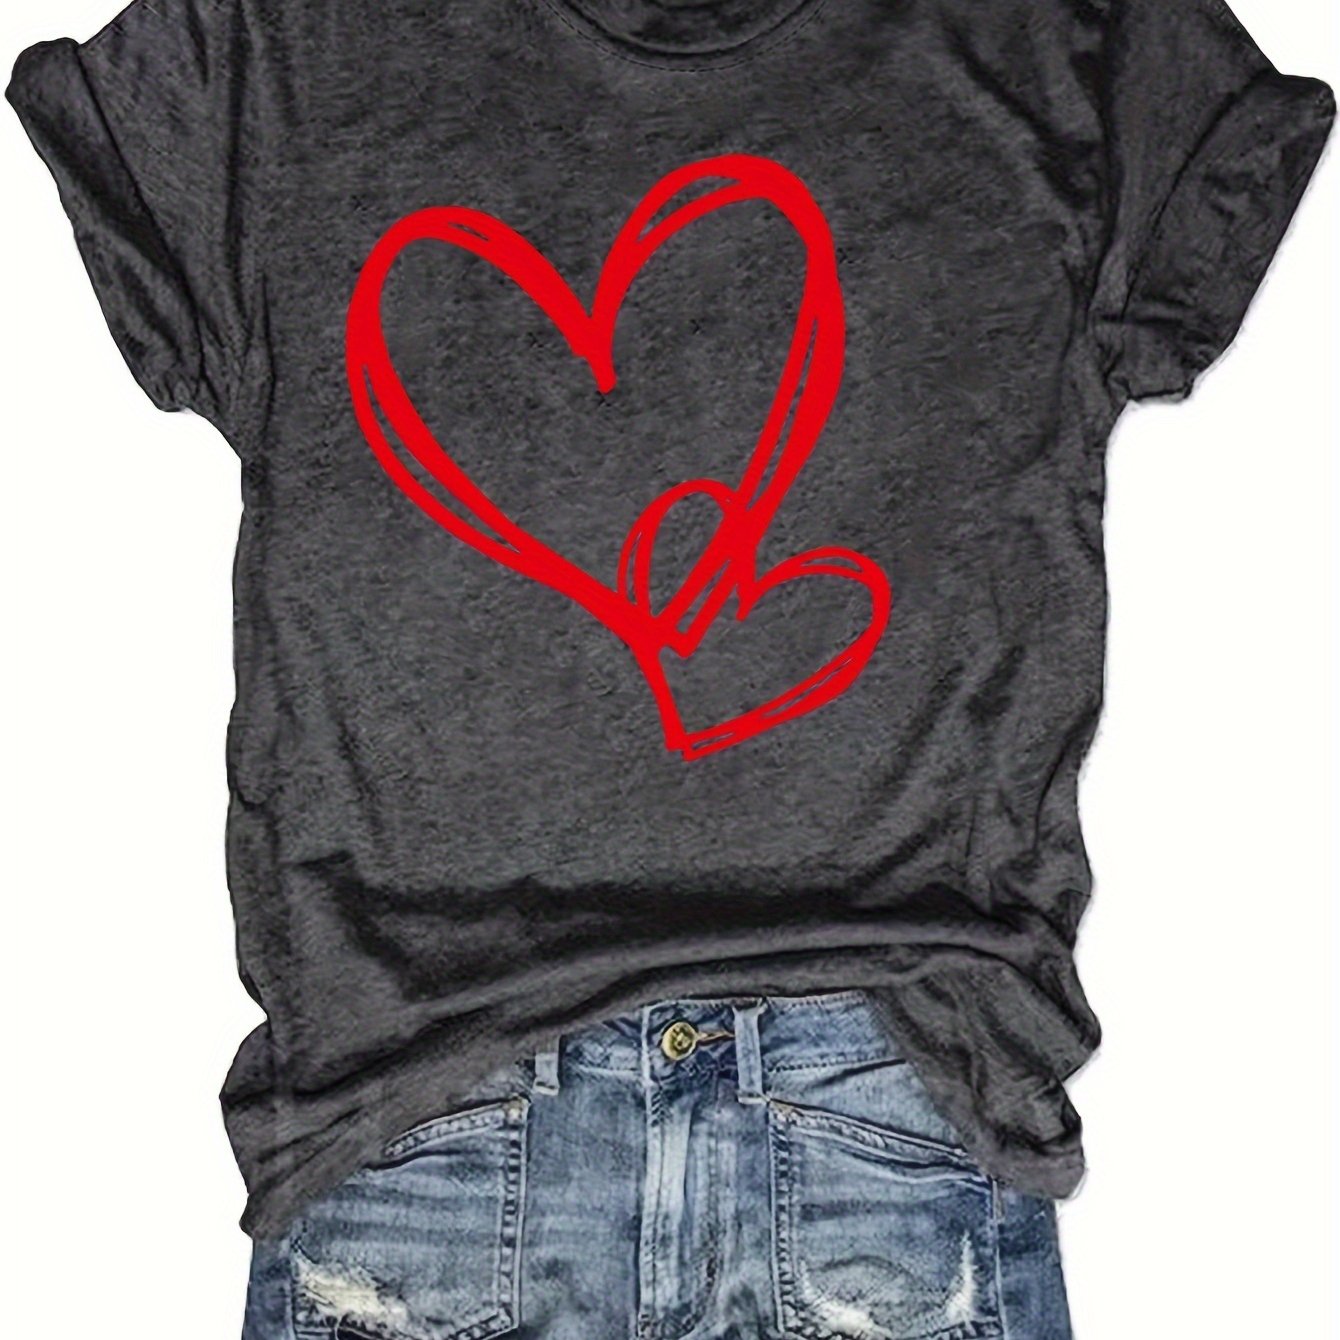 Heart Print Crew Neck T-shirt, Casual Short Sleeve Top For Spring & Fall, Women's Clothing